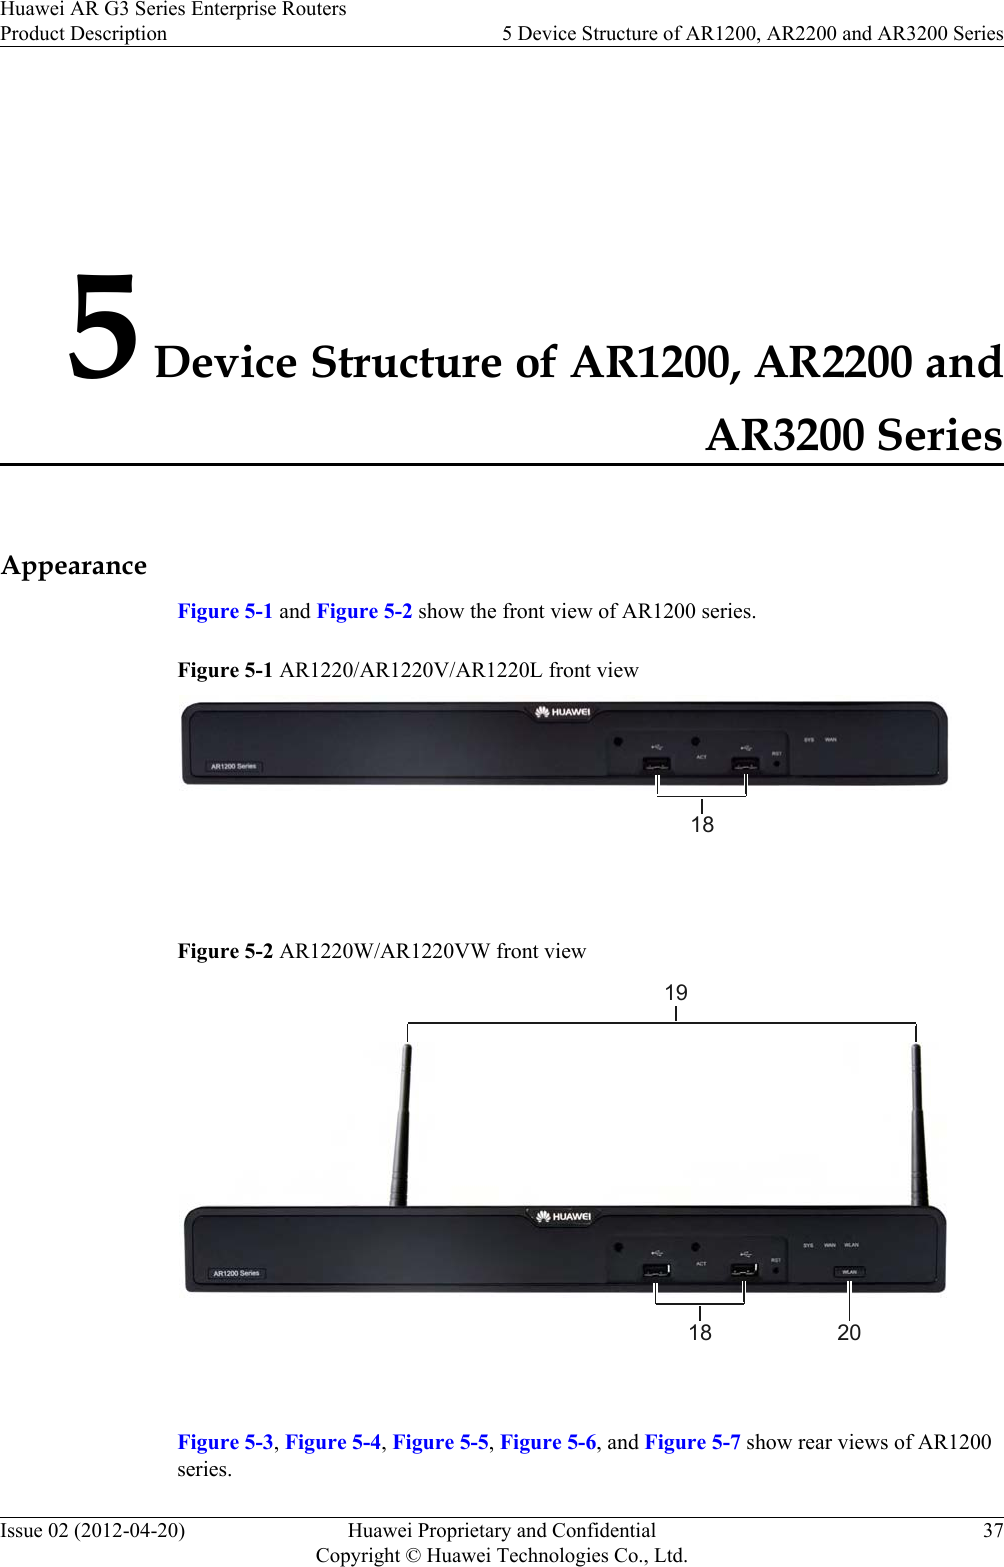 5 Device Structure of AR1200, AR2200 andAR3200 SeriesAppearanceFigure 5-1 and Figure 5-2 show the front view of AR1200 series.Figure 5-1 AR1220/AR1220V/AR1220L front view18 Figure 5-2 AR1220W/AR1220VW front view201819 Figure 5-3, Figure 5-4, Figure 5-5, Figure 5-6, and Figure 5-7 show rear views of AR1200series.Huawei AR G3 Series Enterprise RoutersProduct Description 5 Device Structure of AR1200, AR2200 and AR3200 SeriesIssue 02 (2012-04-20) Huawei Proprietary and ConfidentialCopyright © Huawei Technologies Co., Ltd.37